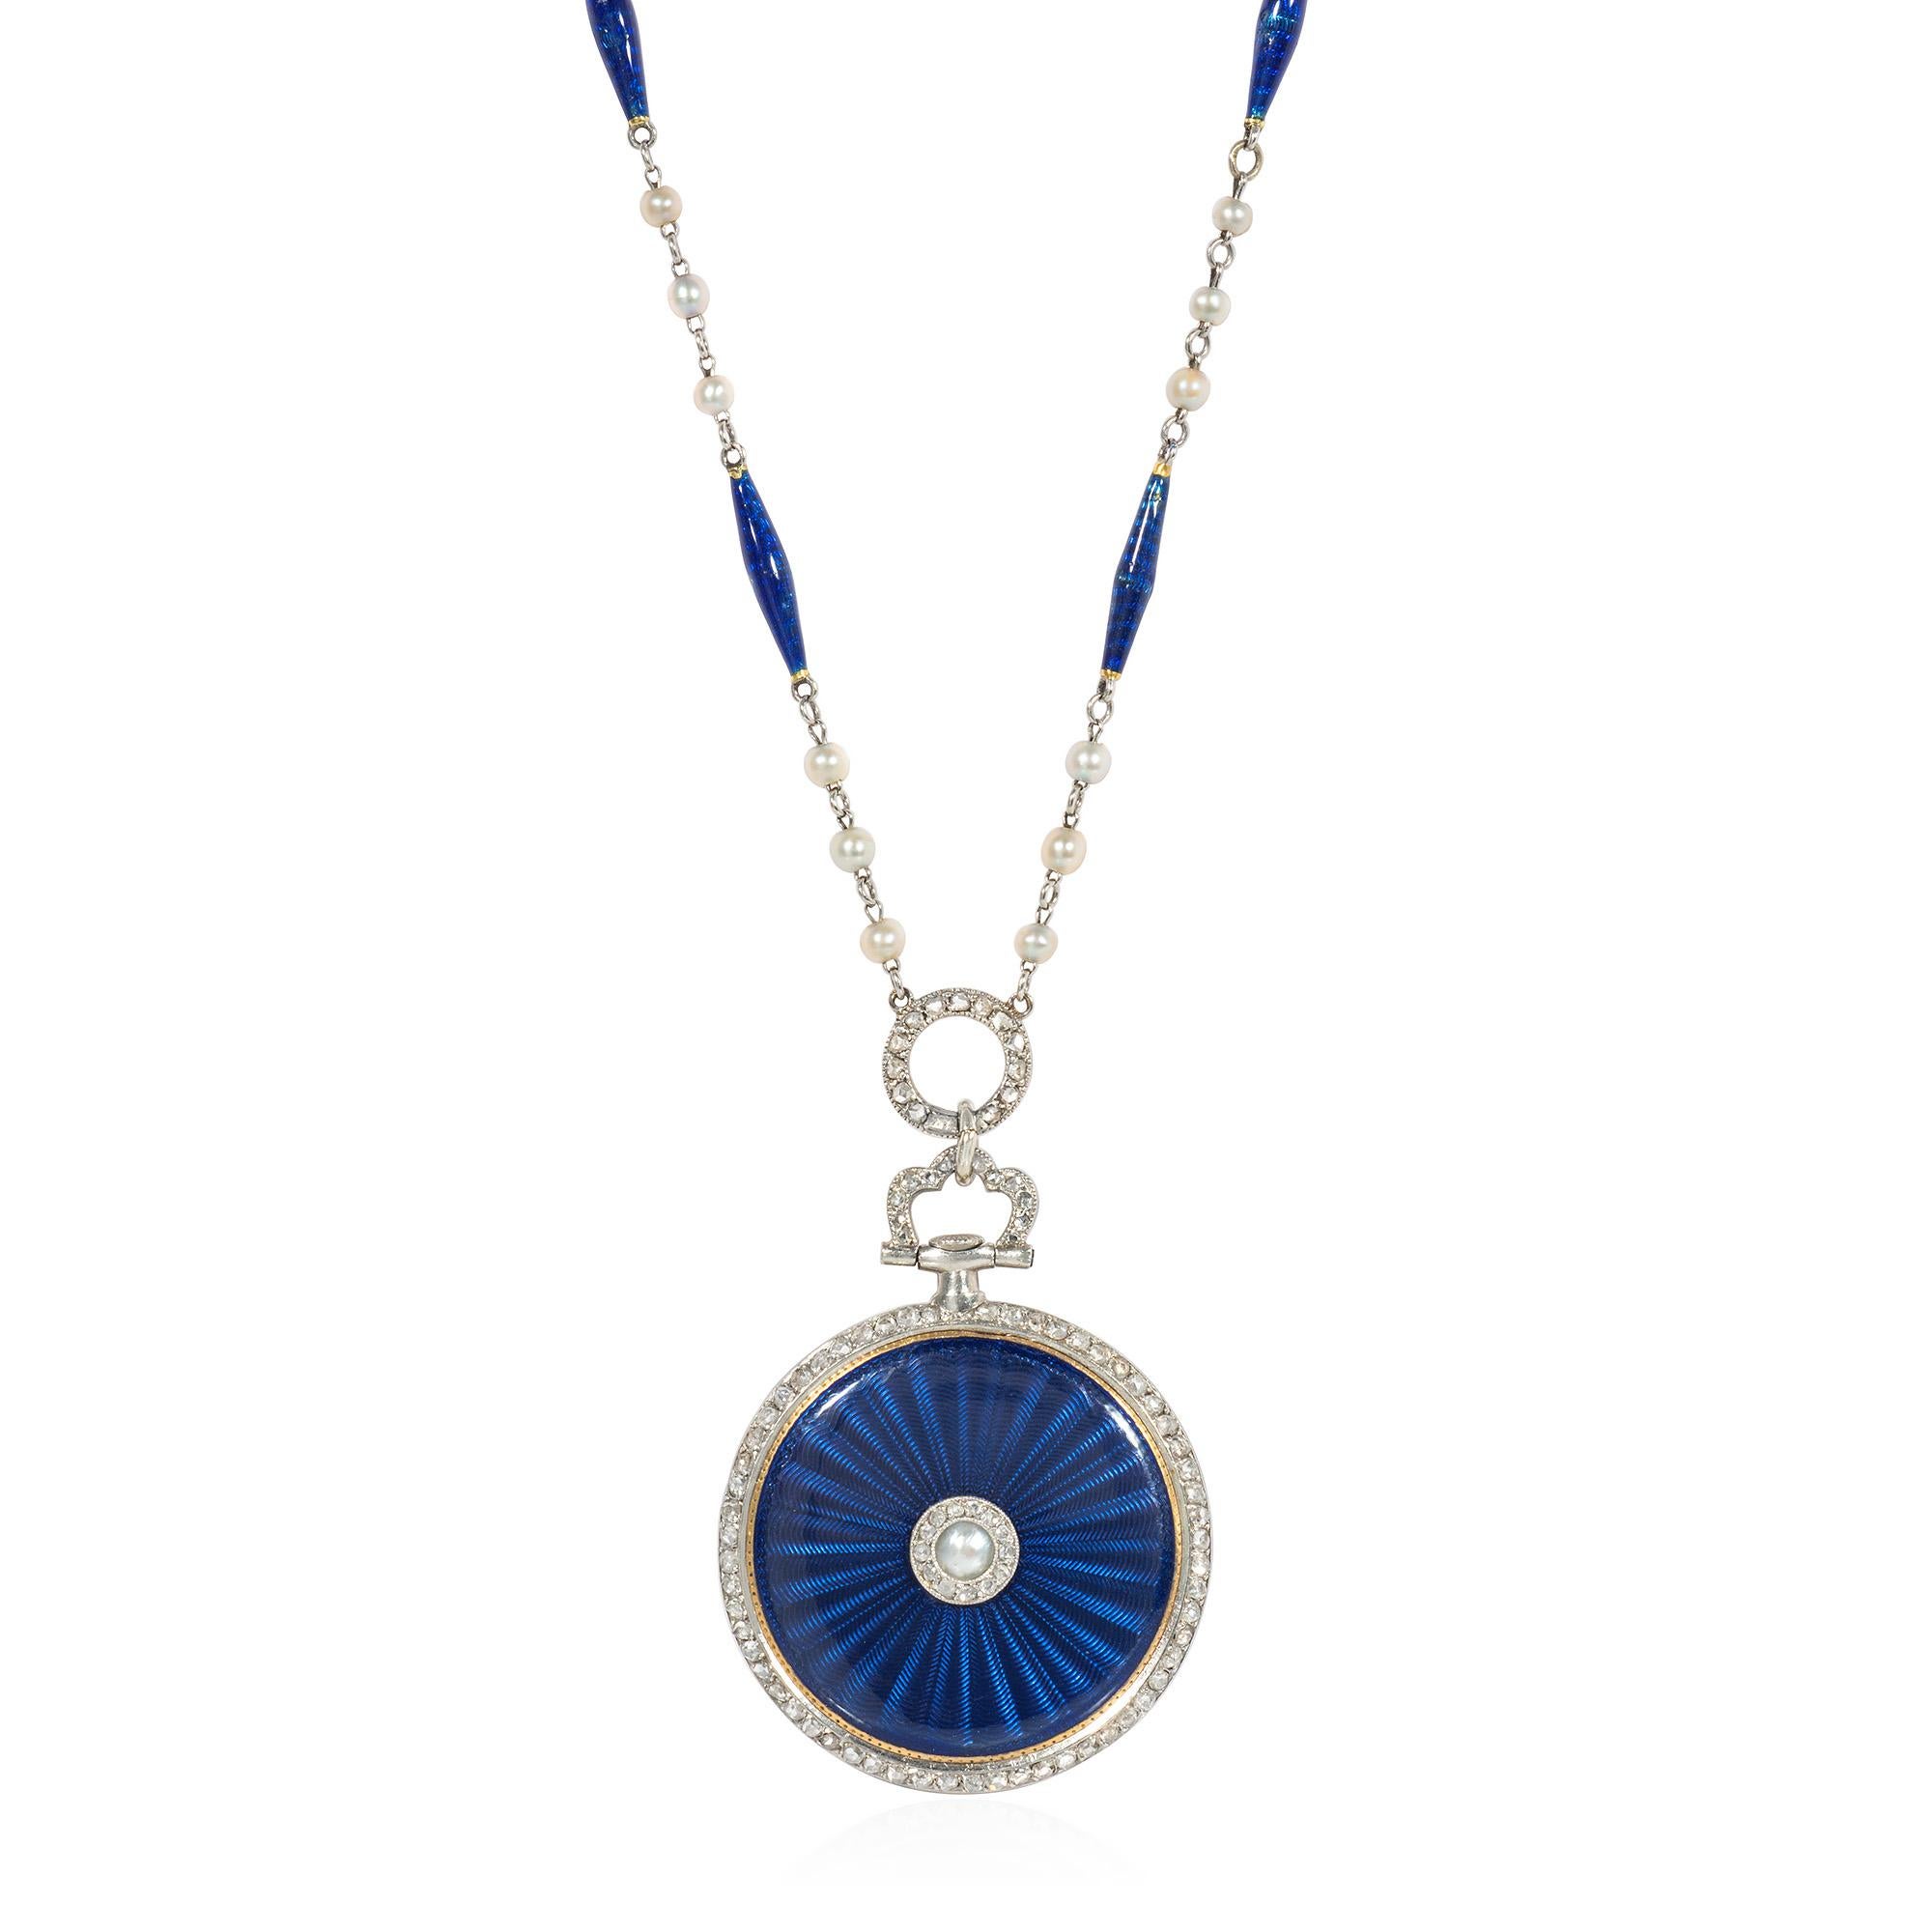 A Belle Epoque period enamel, diamond, and pearl pendant watch composed of a blue guilloché enamel case centering on a pearl in a rose diamond surround, with rose diamond border and bail, the face featuring Arabic indexes, suspending from an